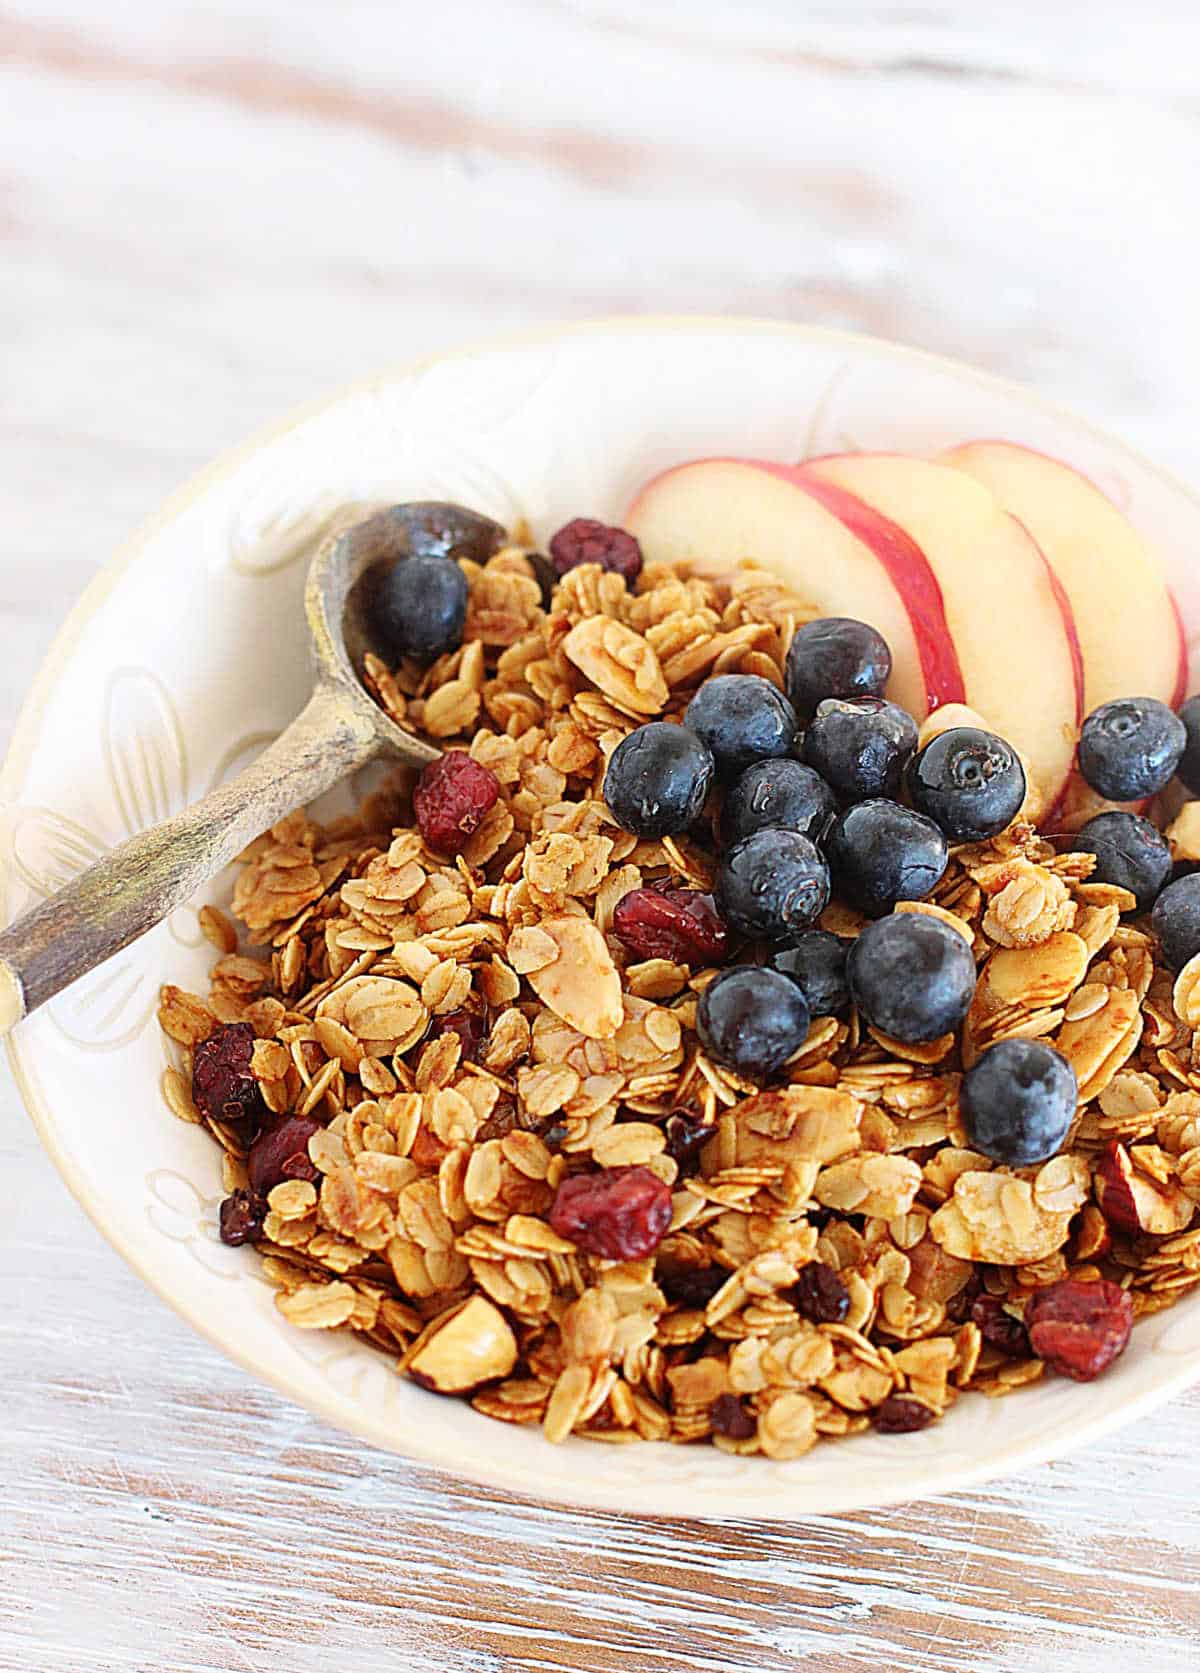 White bowl filled with granola, apples and blueberries, with wooden spoon, on a white table.